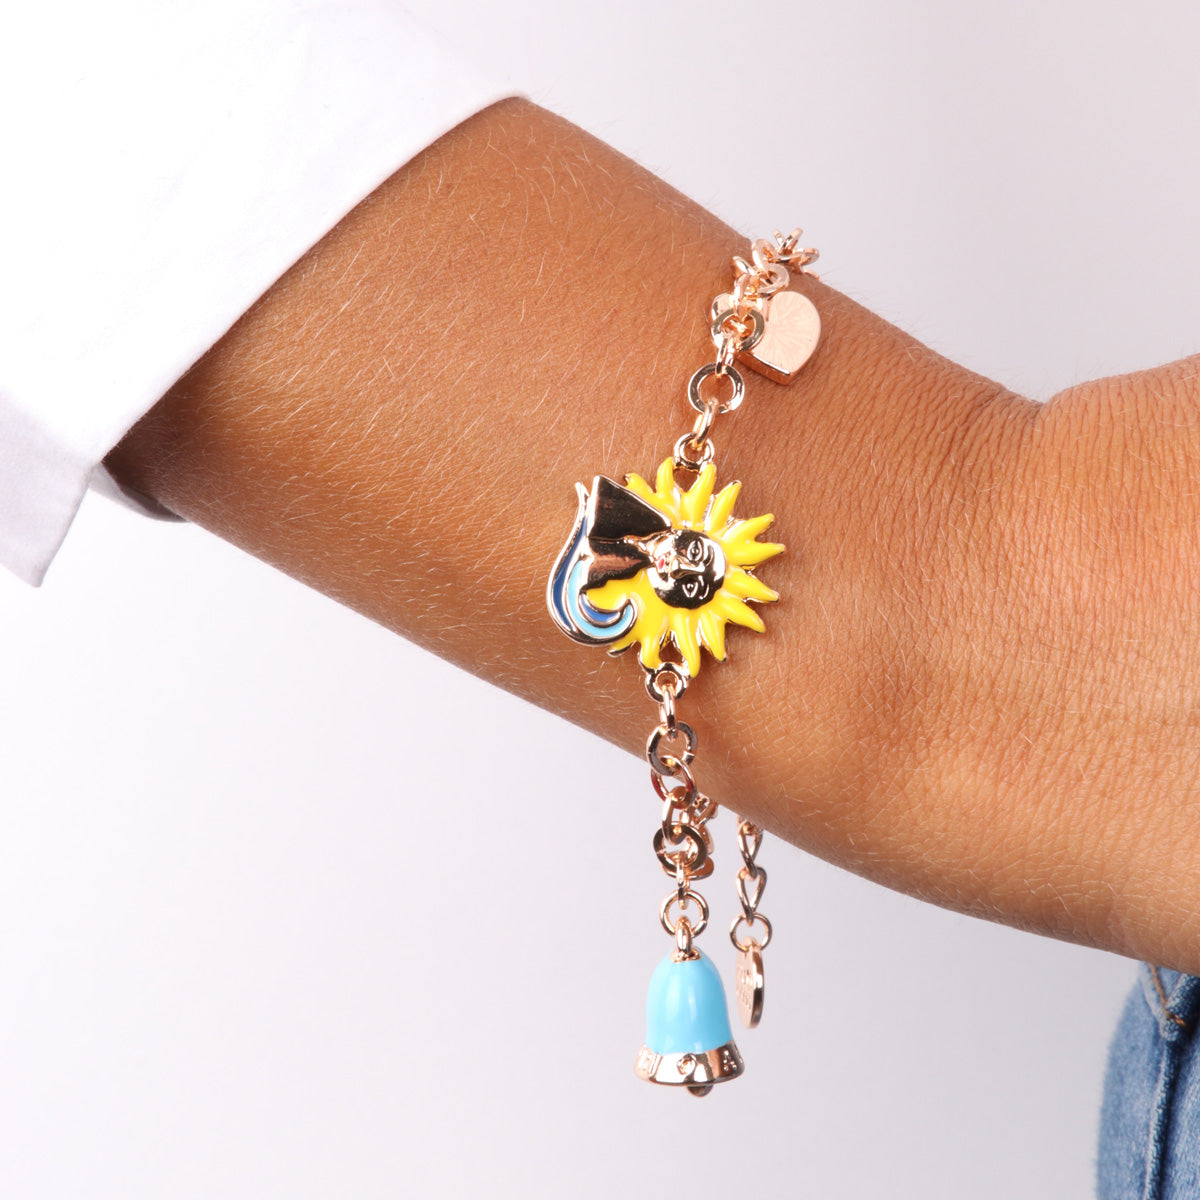 Metal bracelet with Monte Solaro, charming bell and heart with Capri